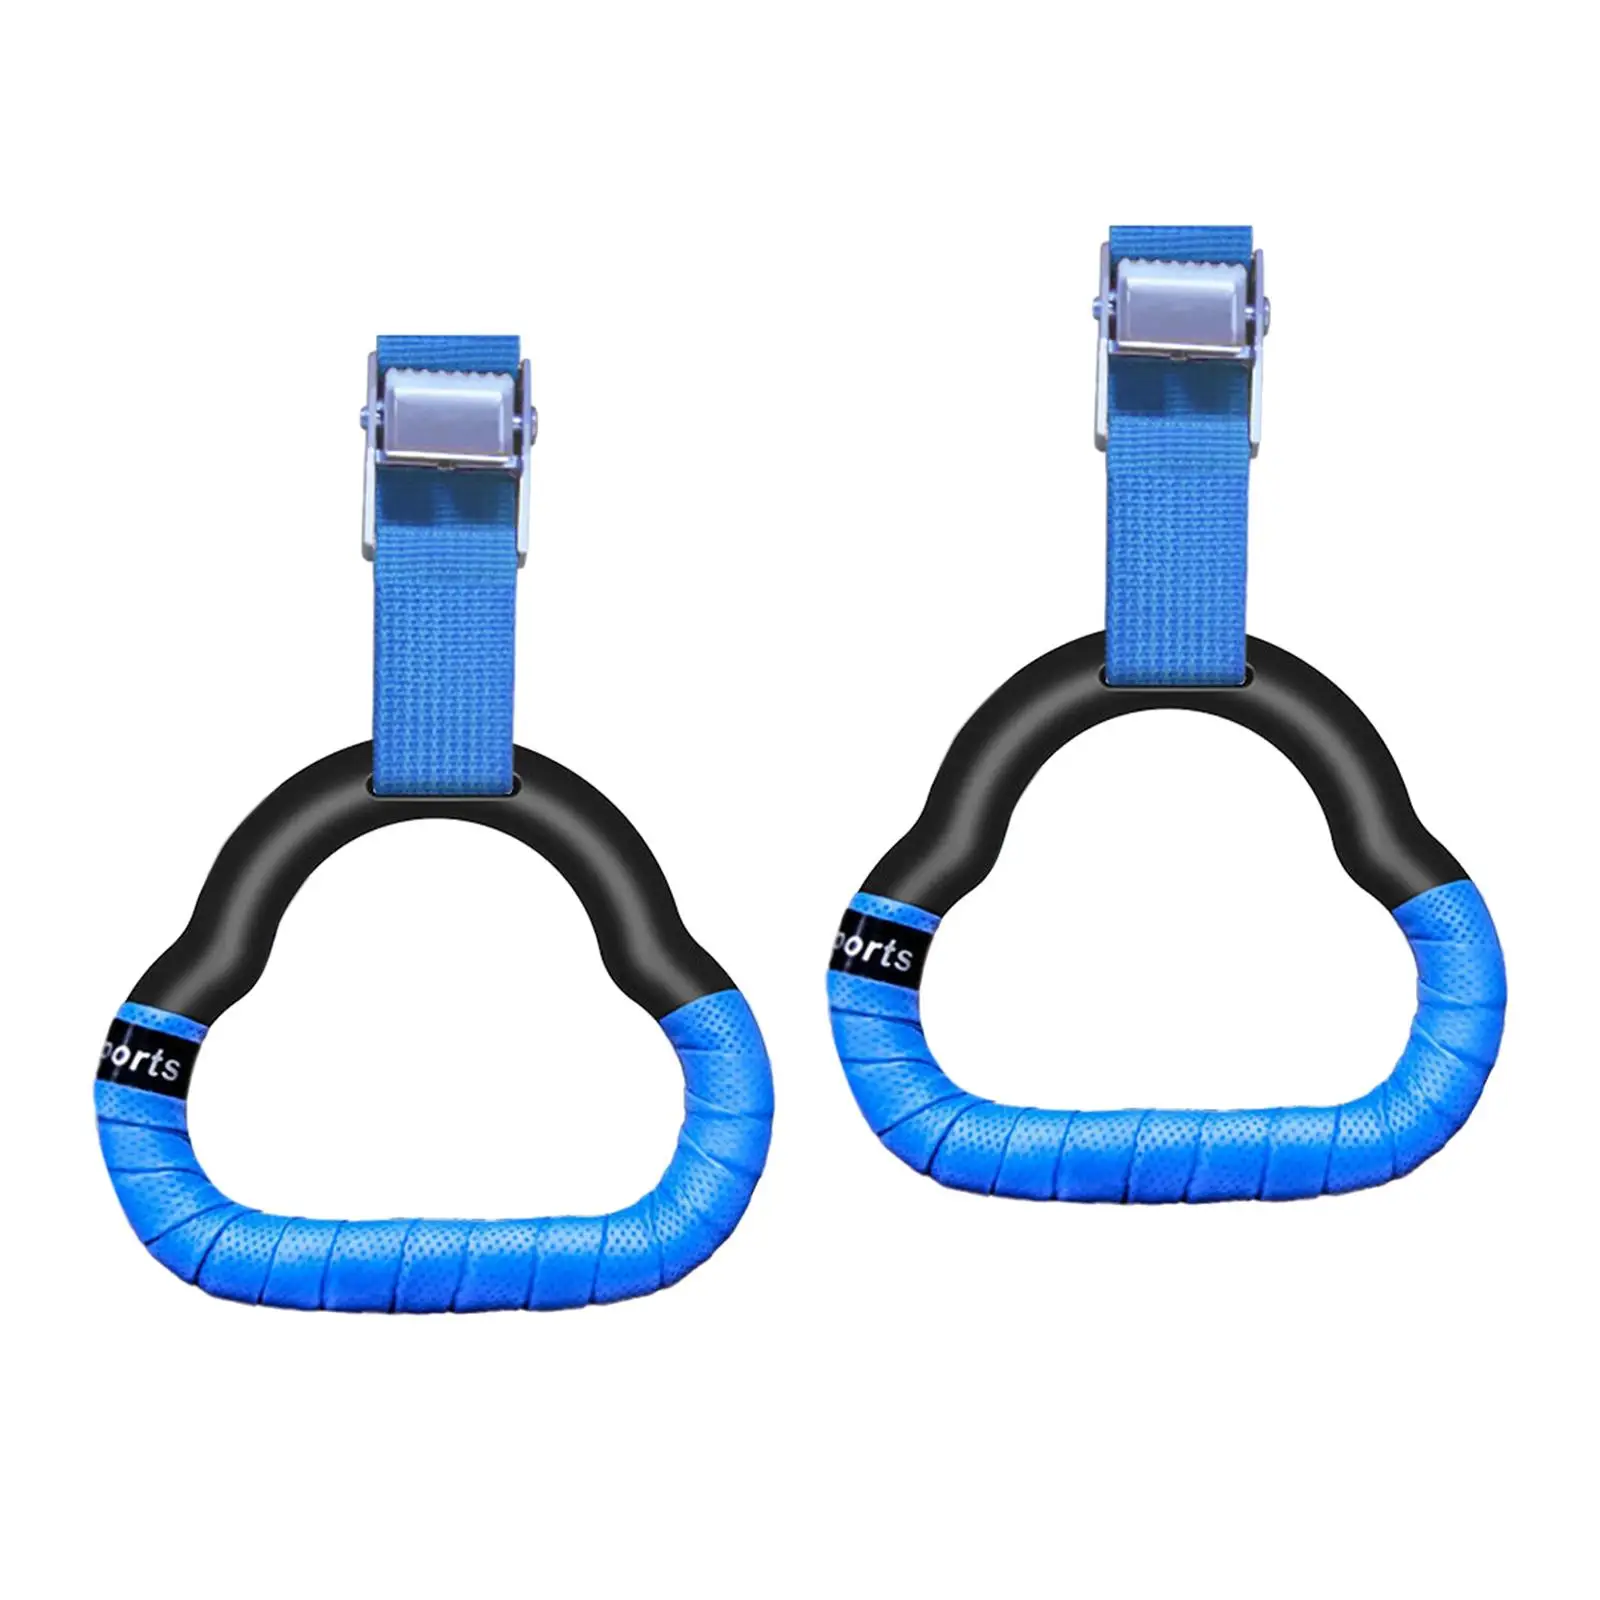 Gymnastics Rings Adjustable Strap Kids Non Slip Handle Pull up Exercise Rings Training Gym Ring for Full Body Workout Home Gym